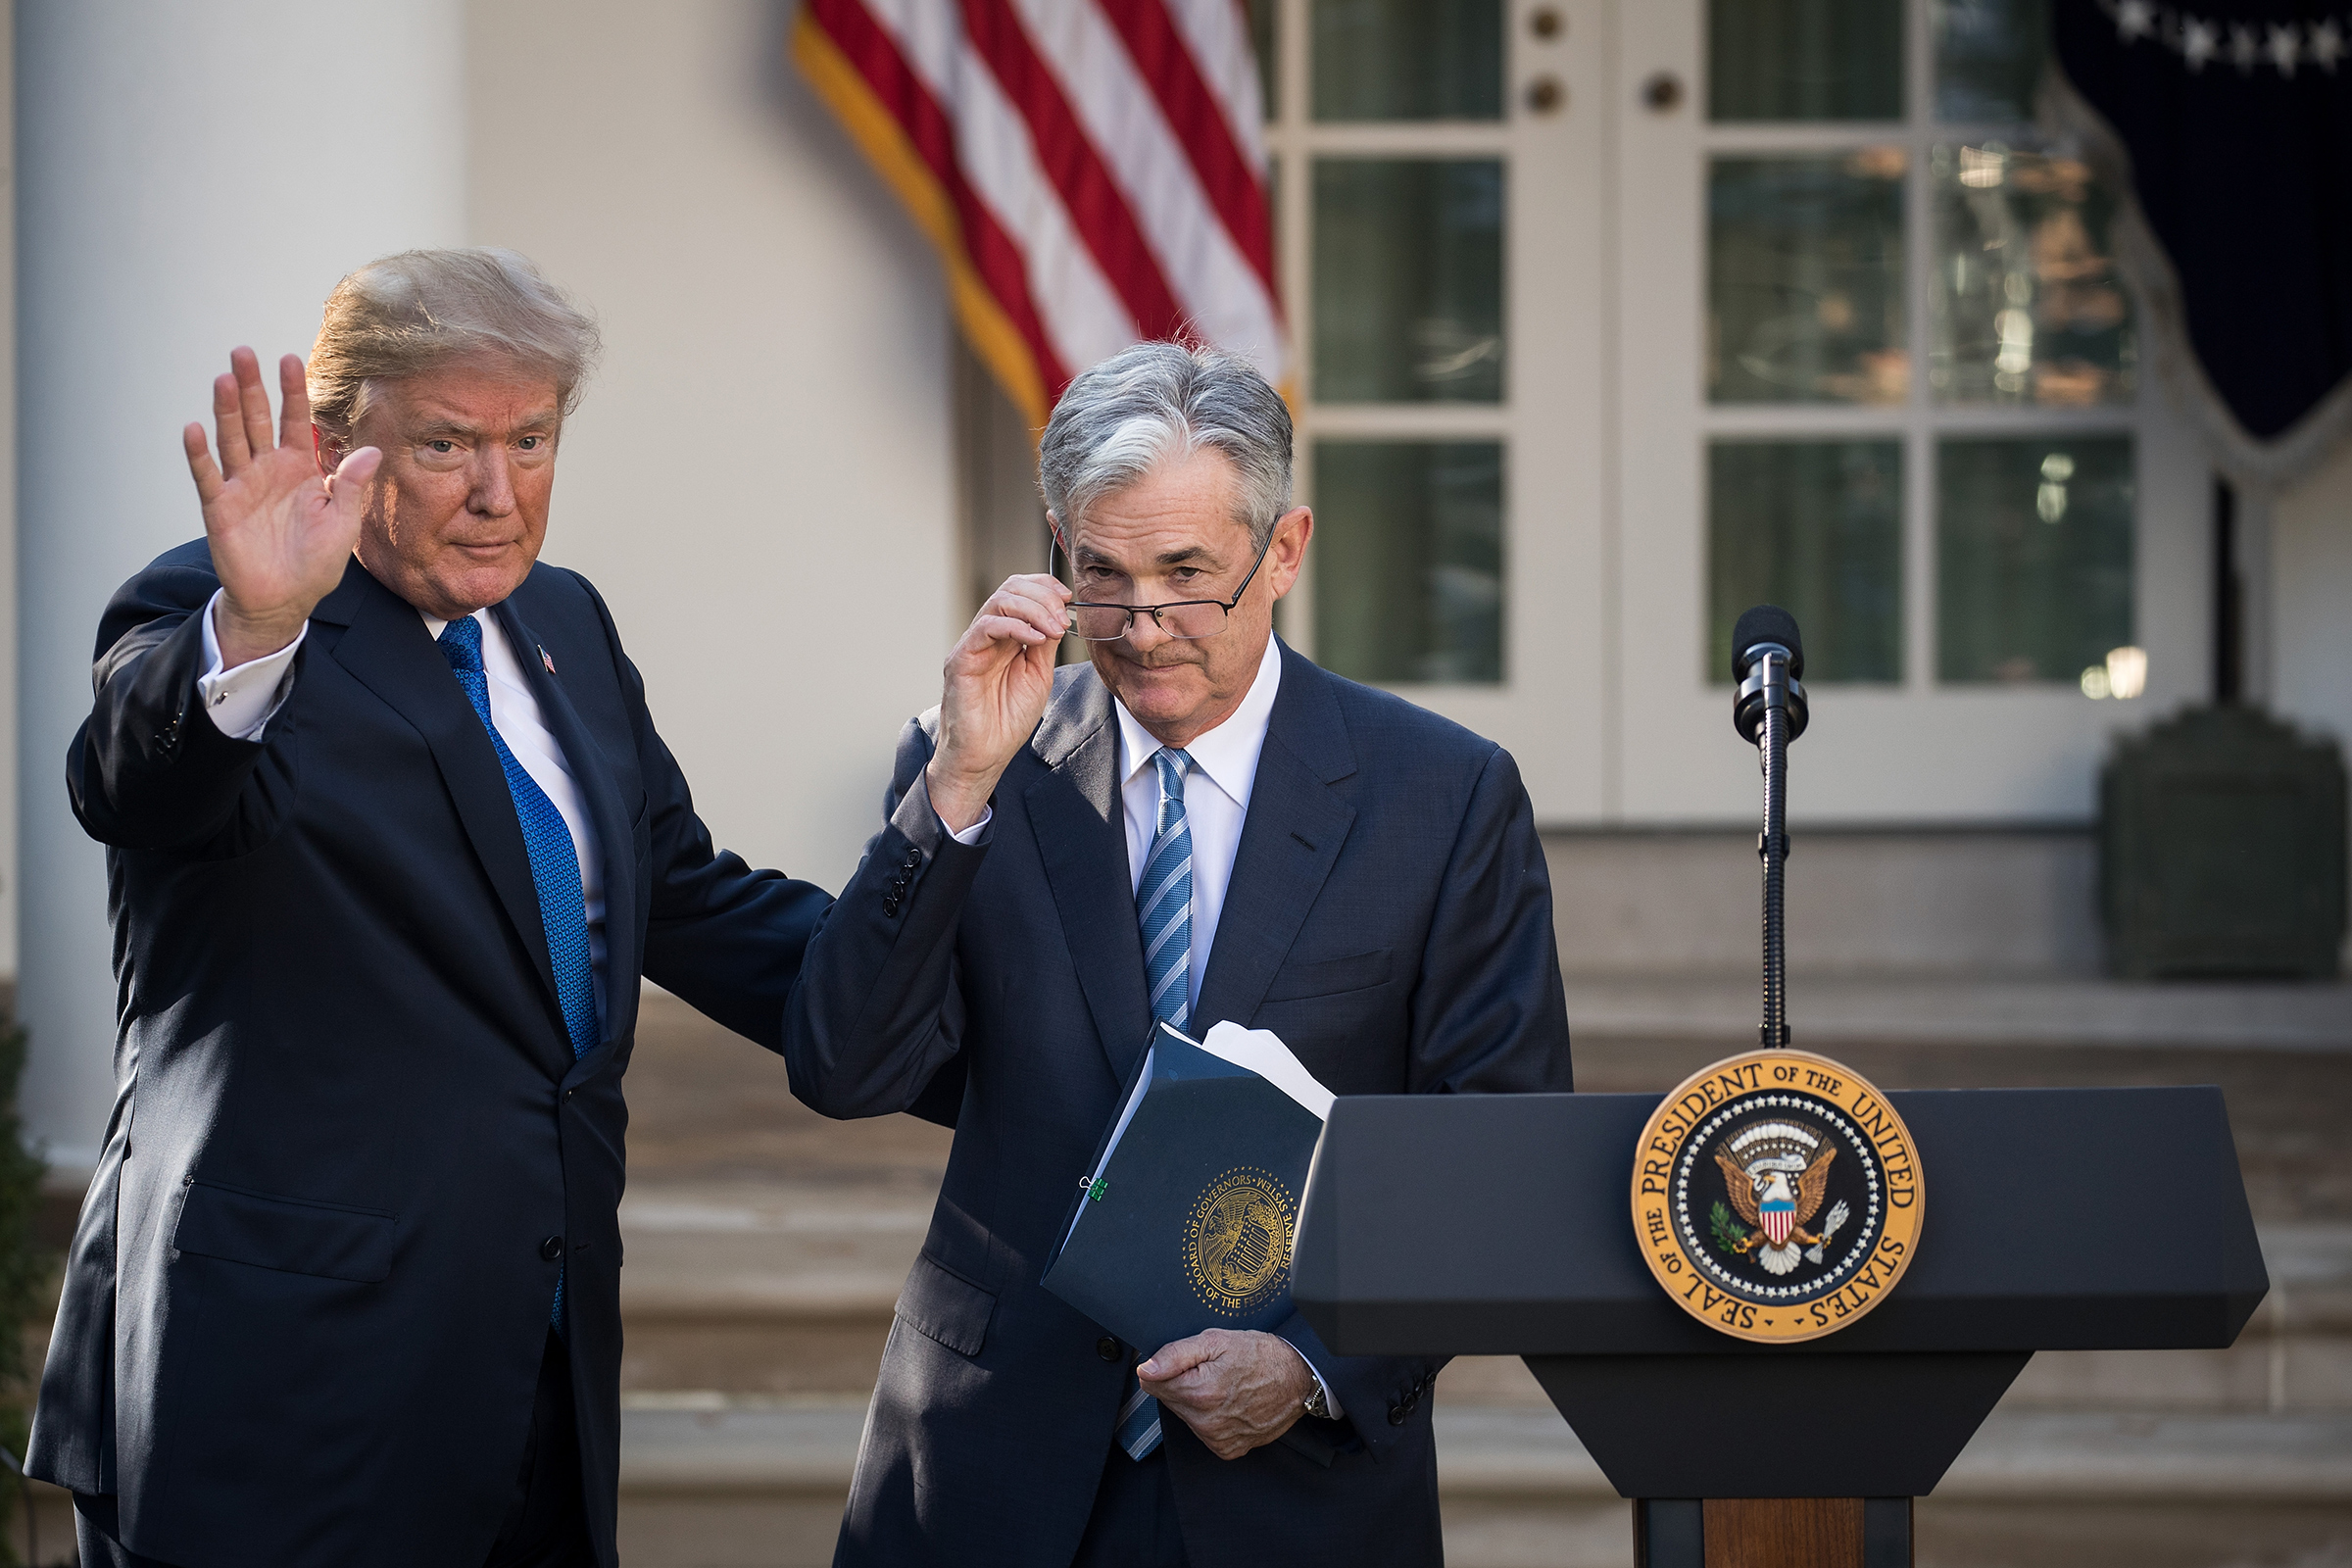 Trump introduces Powell as his nominee for chairman of the Fed in 2017 (Drew Angerer—Getty Images)